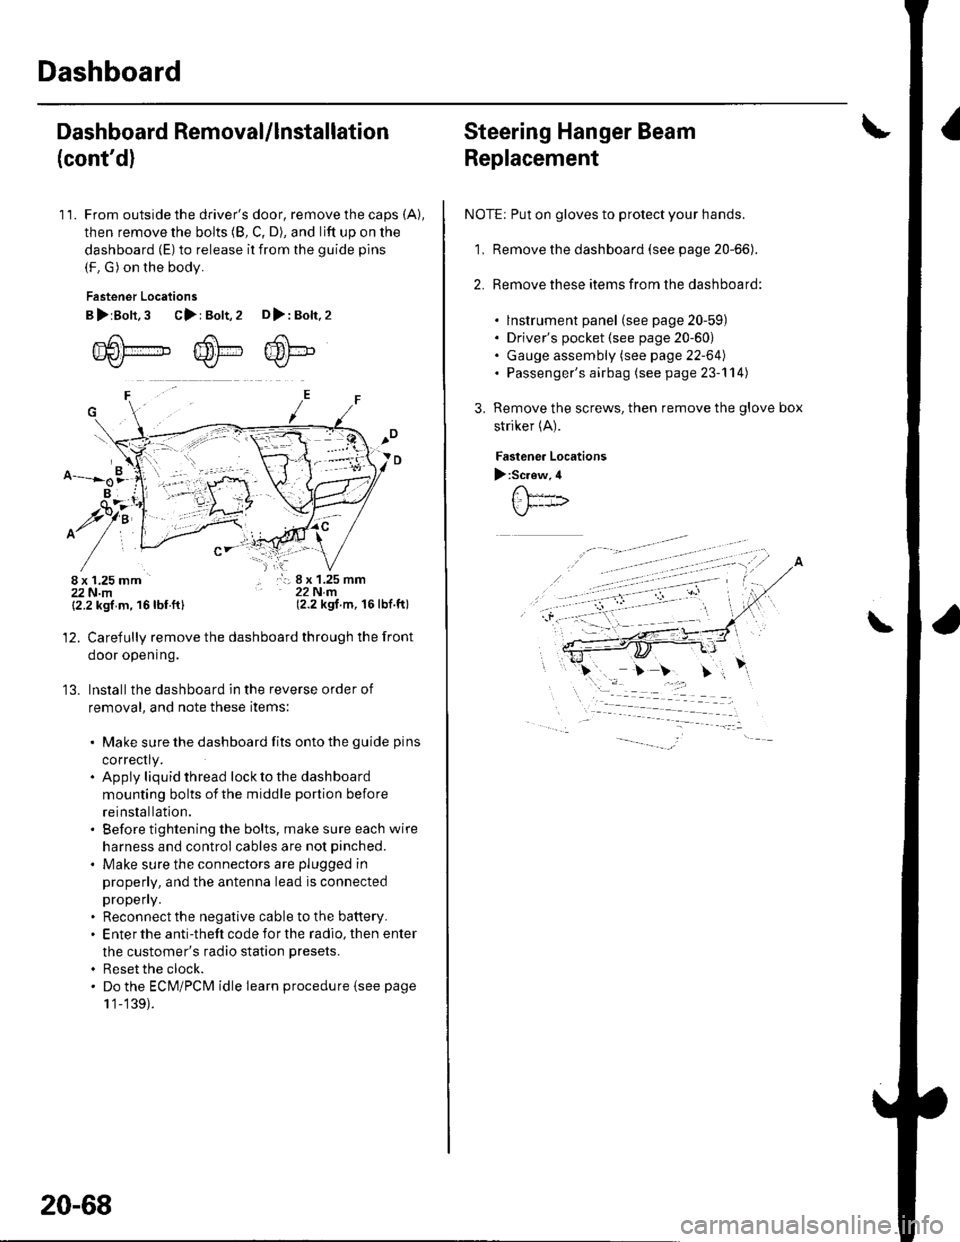 HONDA CIVIC 2003 7.G Workshop Manual Dashboard
Dashboard Removal/lnstallation
(contd)
11. From outside the drivers door, remove the caps (A),
then remove the bolts (8, C, D), and lift up on the
dashboard (E) to release it from the guid